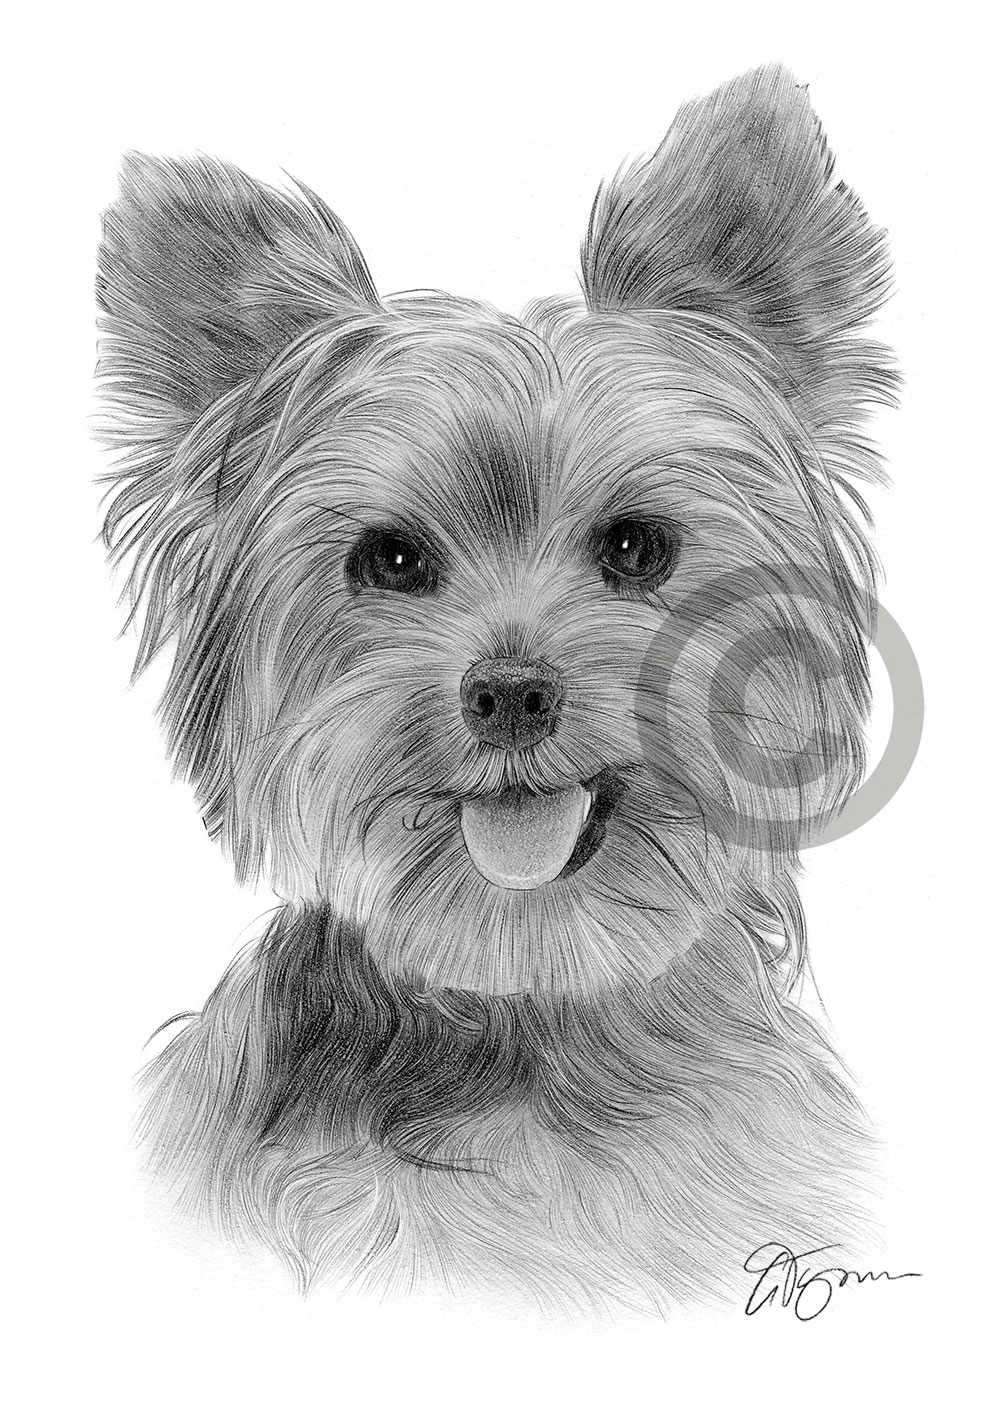 Pencil drawing of an adult Yorkshire Terrier by artist Gary Tymon